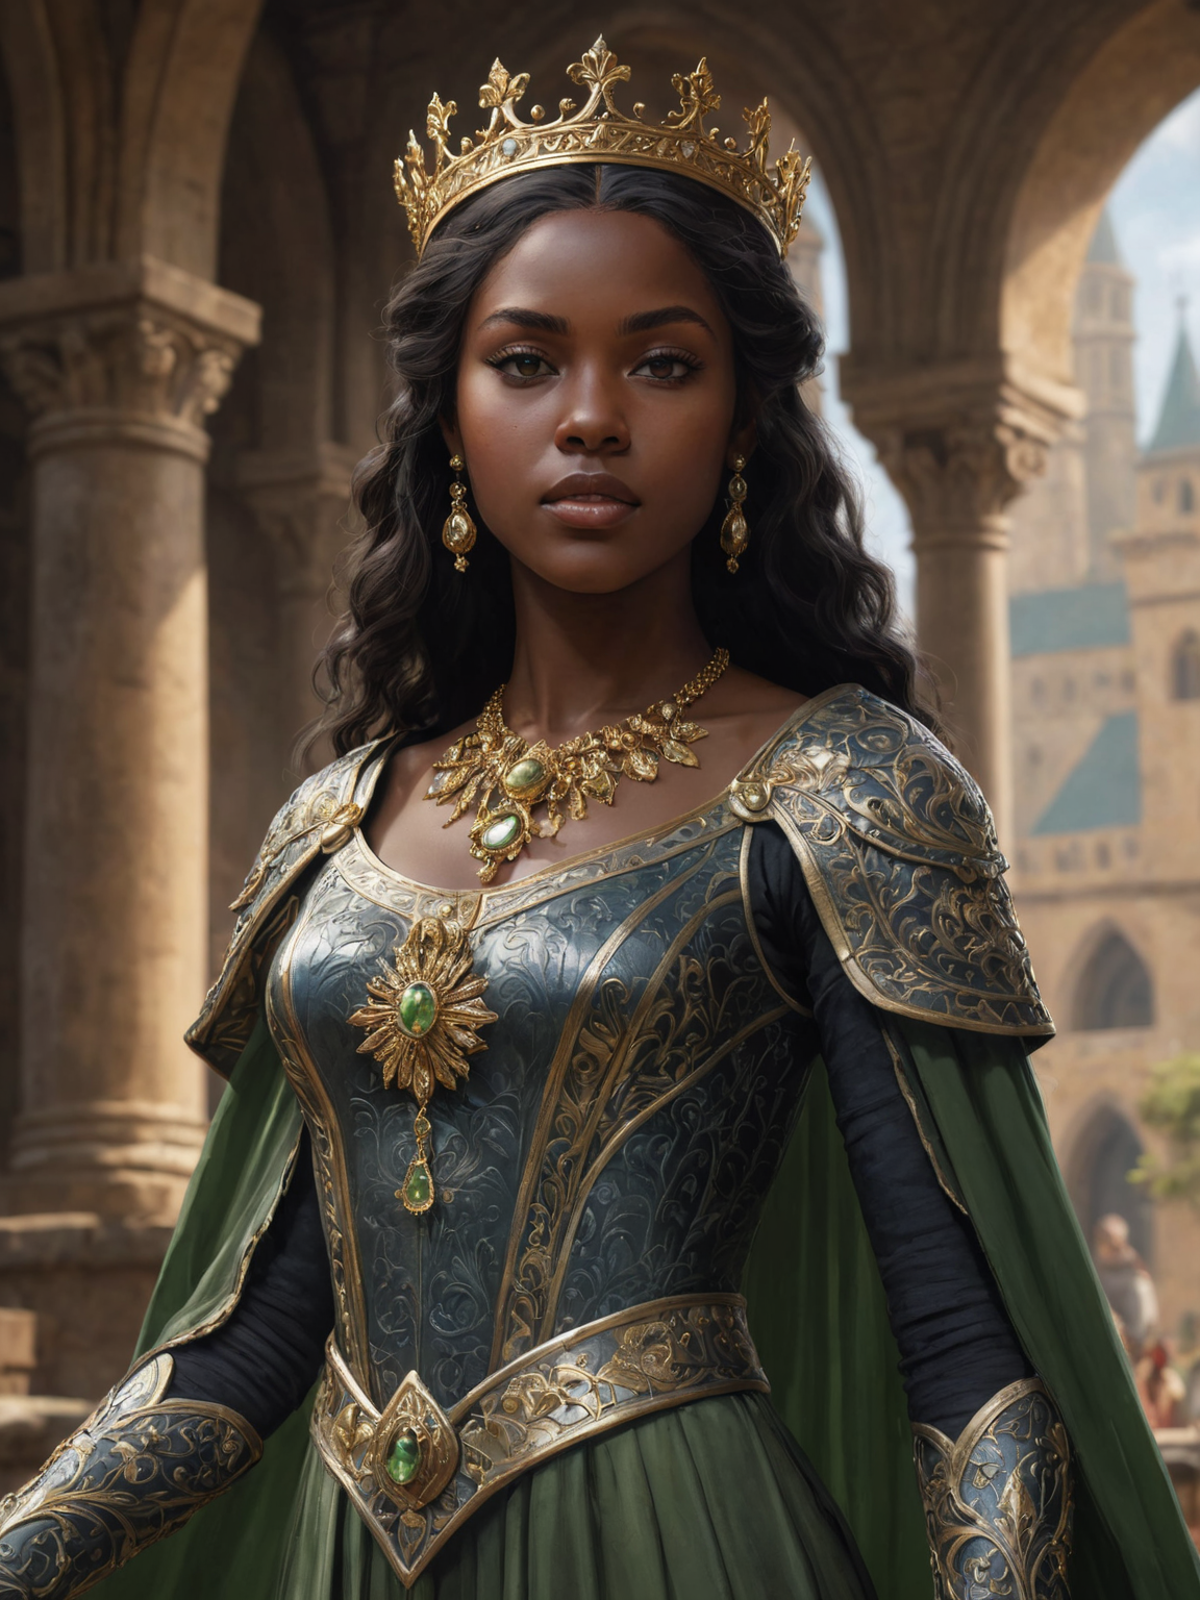 A dark-skinned woman wearing a crown and a gold dress.